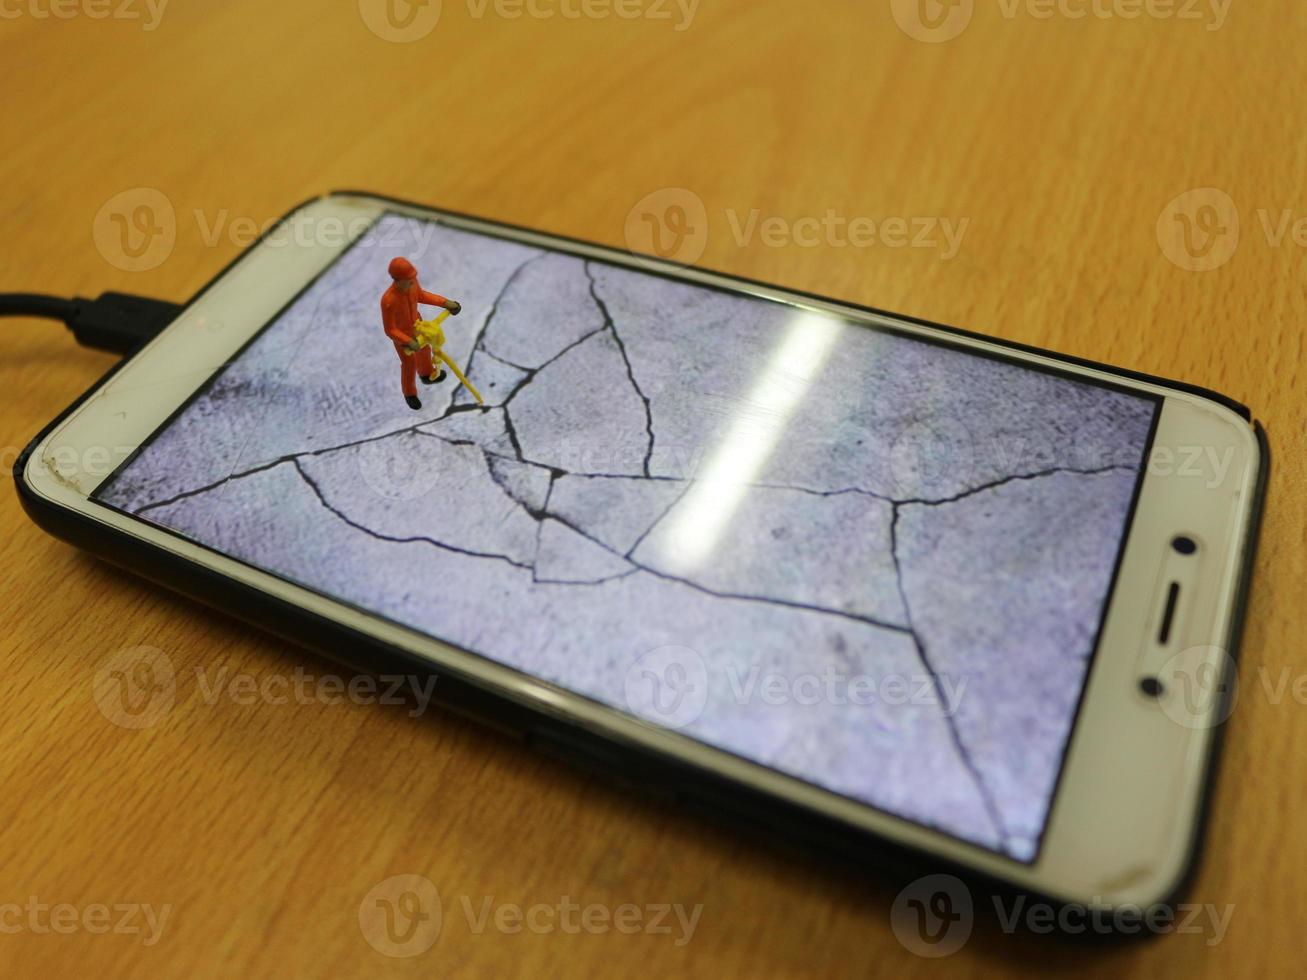 a miniature figure of a highway worker breaking a cell phone screen. photo